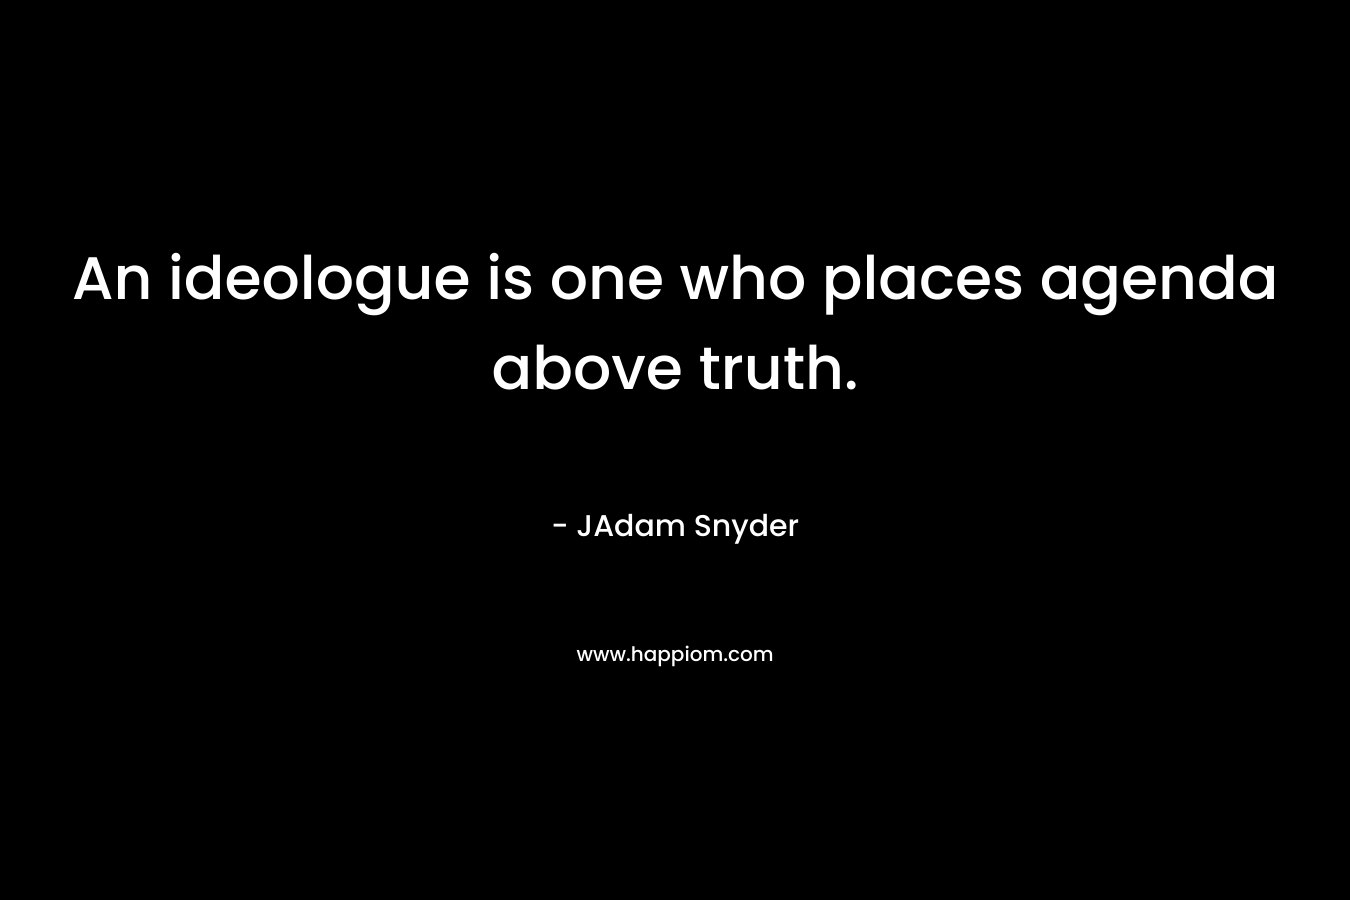 An ideologue is one who places agenda above truth.